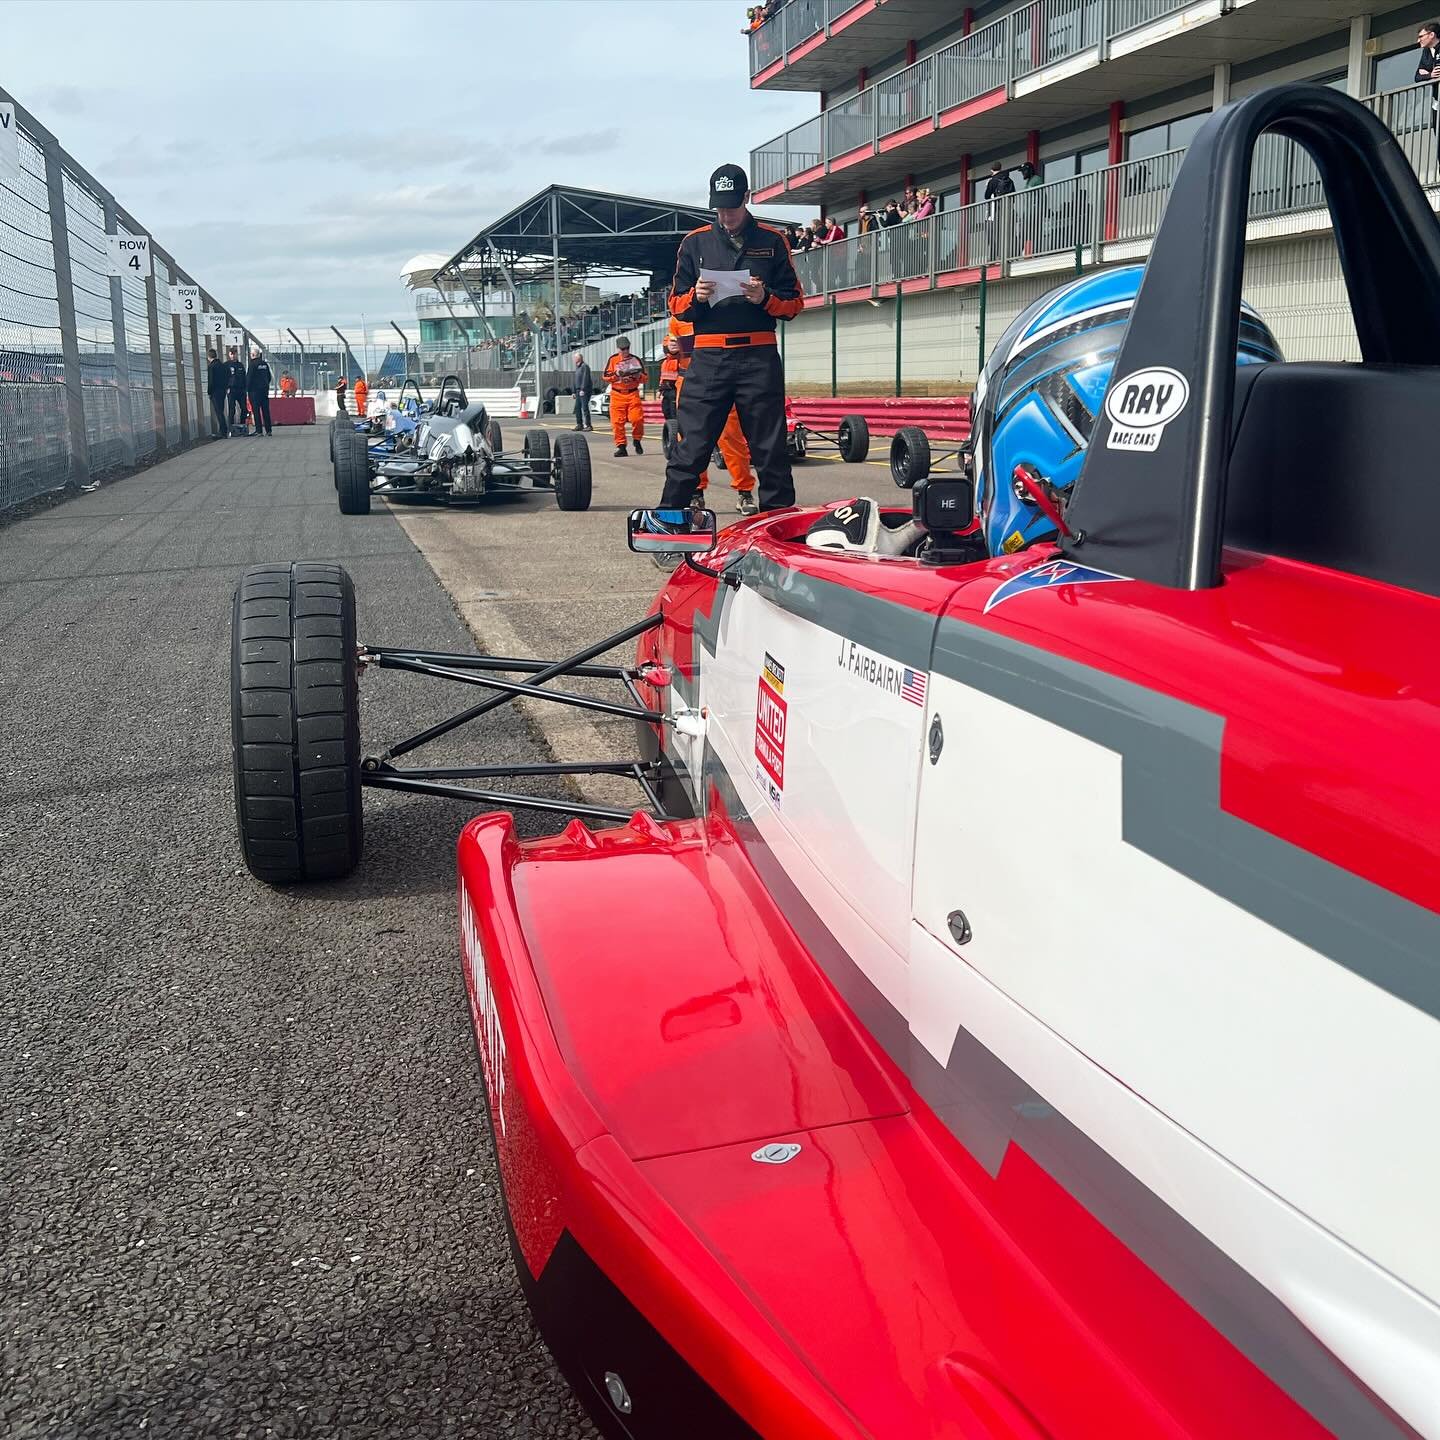 A solid weekend for us @silverstonecircuit with @jeremy.fairbairn this weekend. After qualifying 11th, Jeremy grabbed P4 and P5 in Race 1 and 2 respectively! 🙌 
&bull;
#formulaford #ff1600 #formulafordnational #ff1600national #formulaford #unitedfor